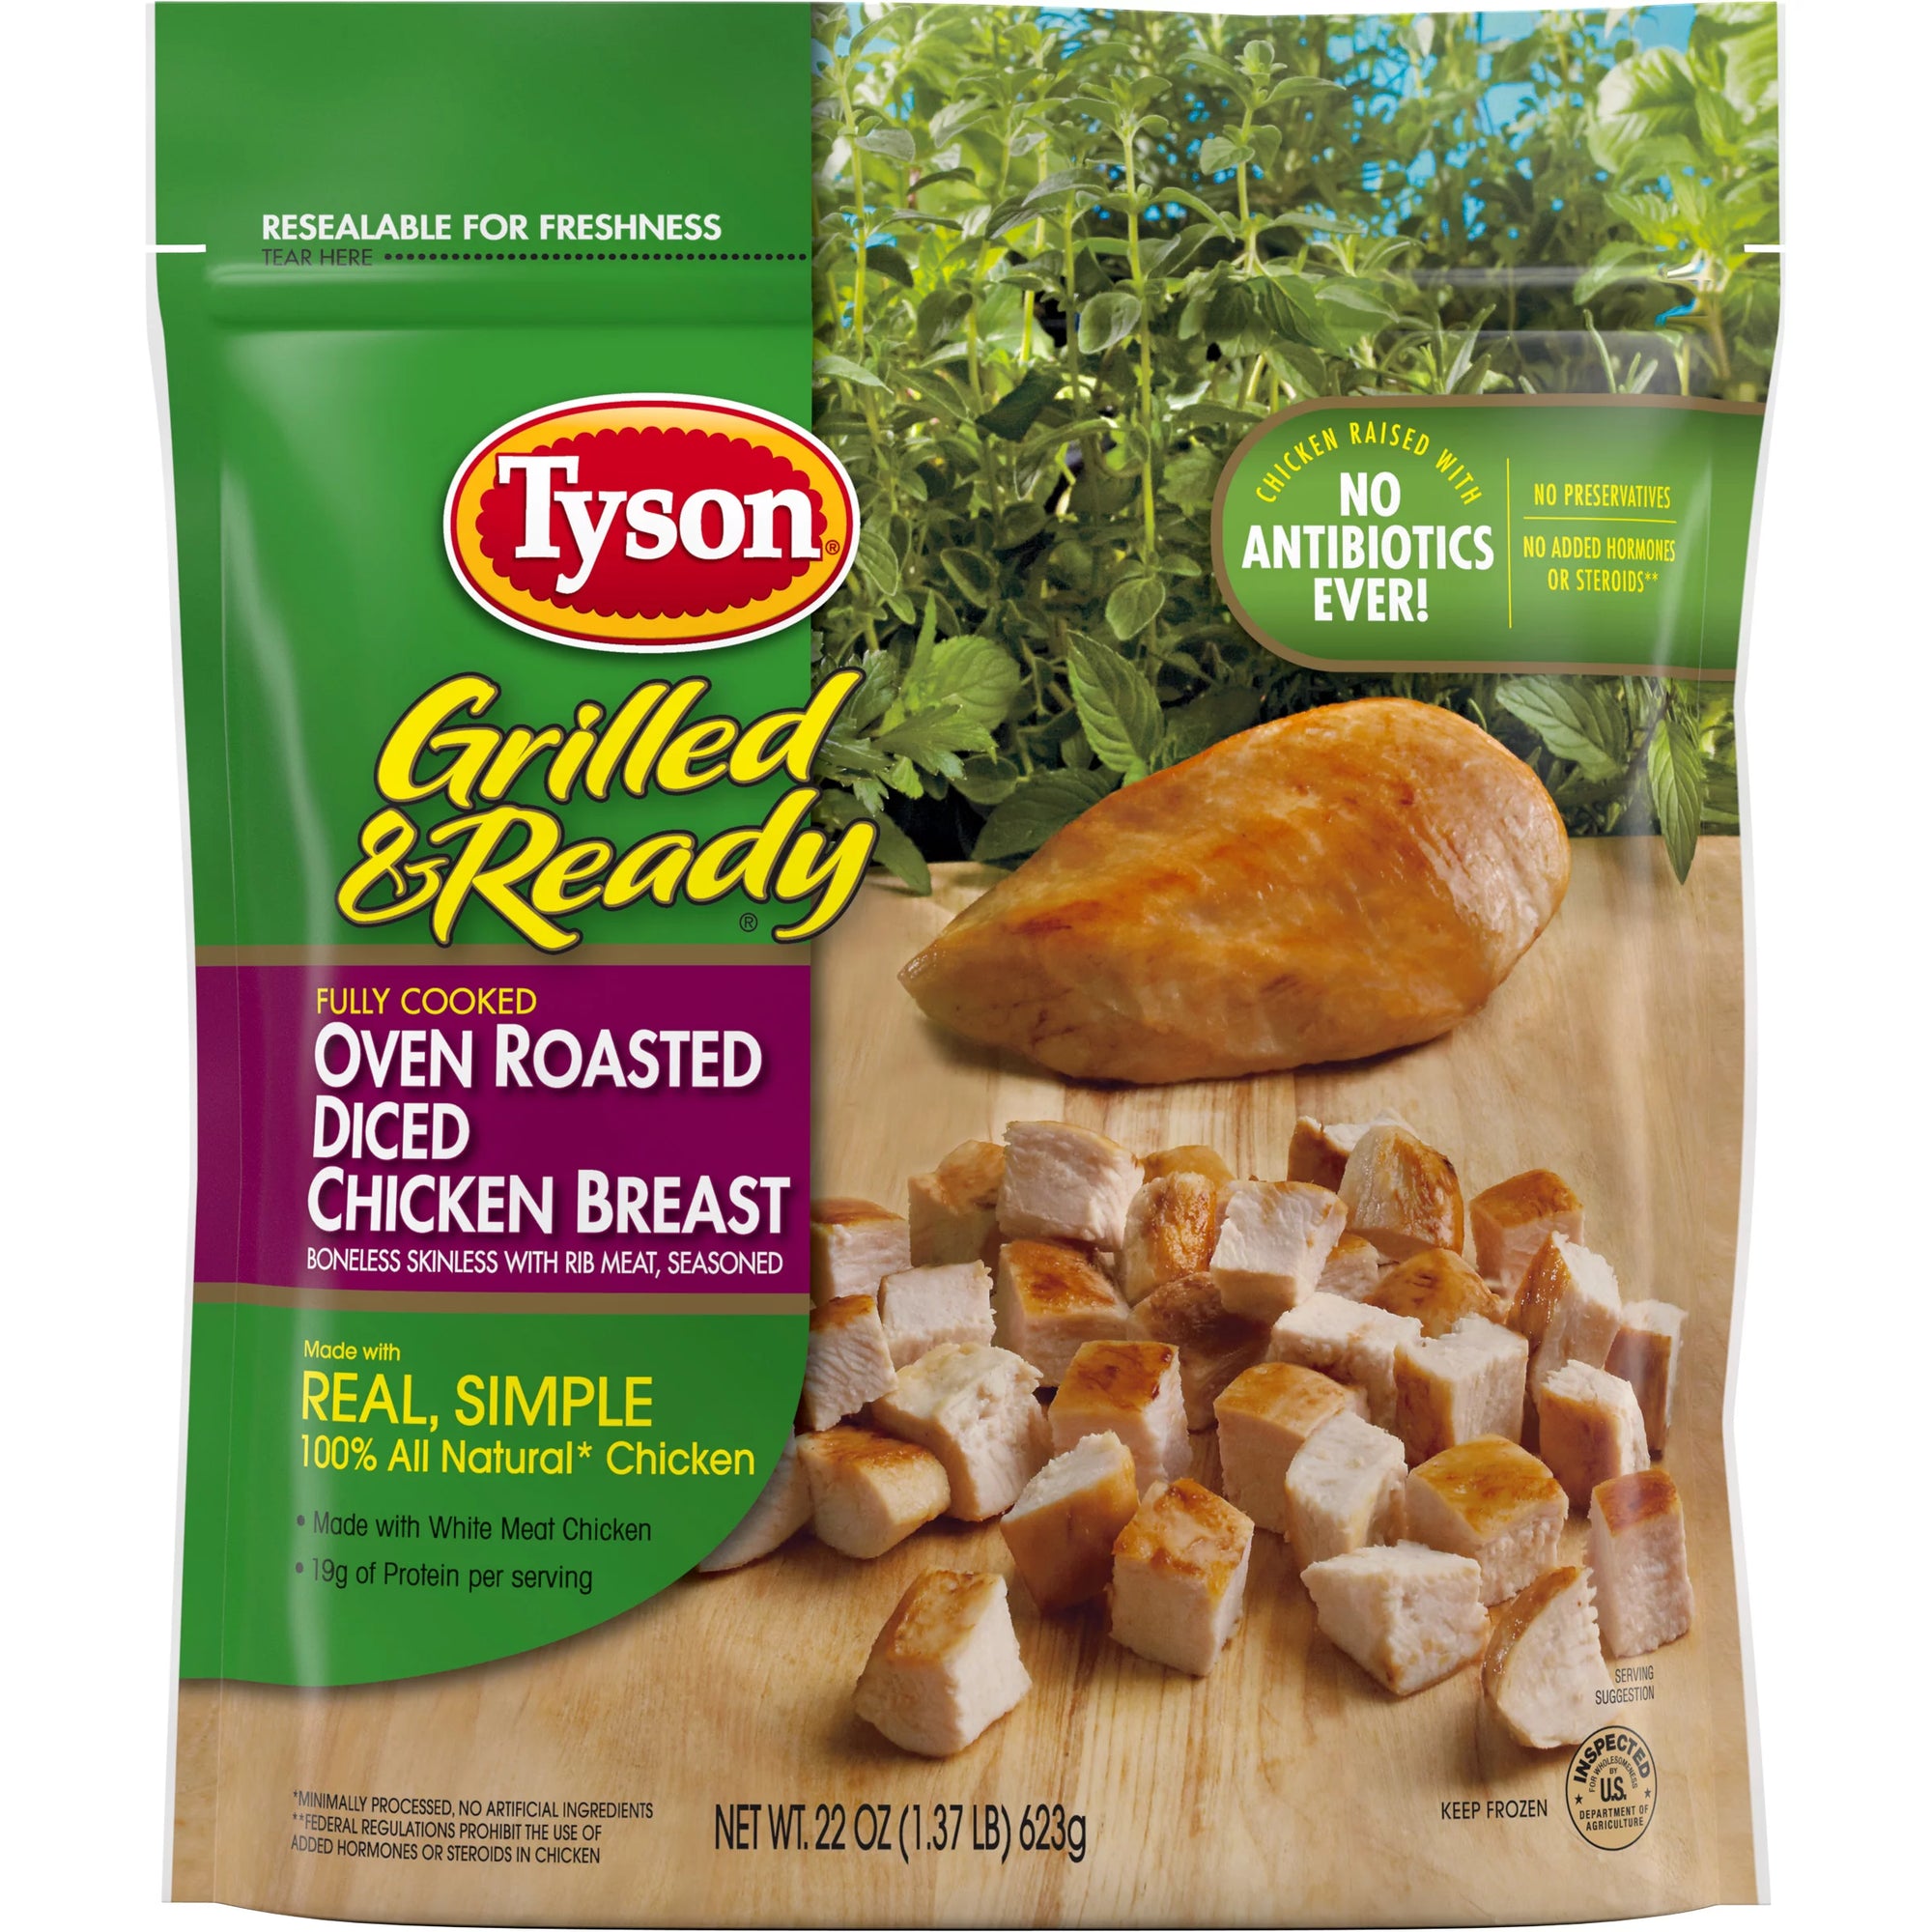 Tyson Grilled & Ready Oven Roasted Diced Chicken Breast, 22 Oz